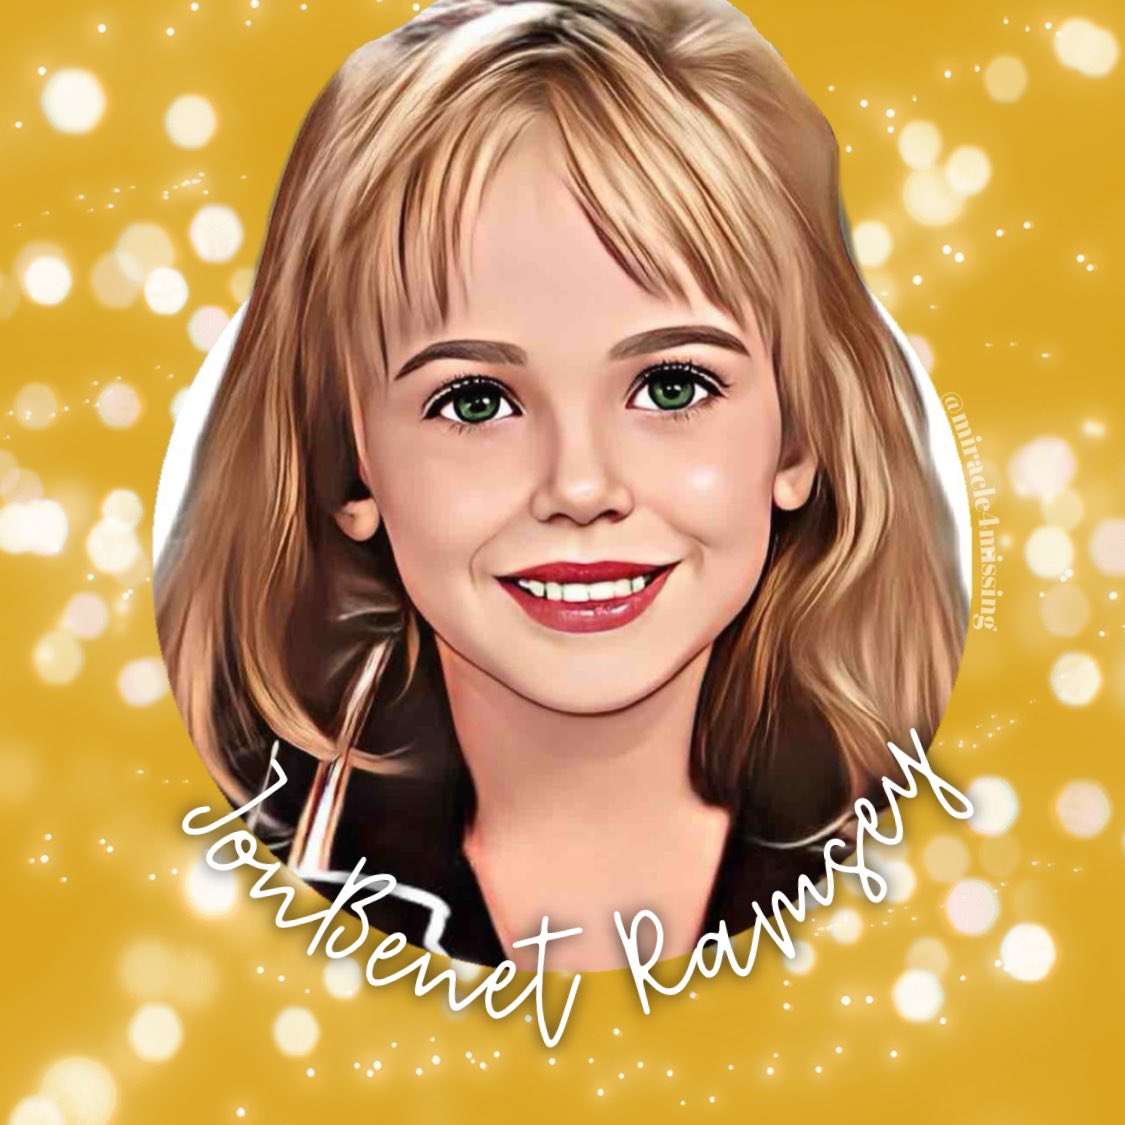 I wonder who you’d be today. #JonBenét Patricia Ramsey. You’d be starting your 30s. No doubt as beautiful as you always were, maybe even have children of your own. Life is implicitly cruel at times I wish justice was served. May you rest in peace. 

#JonBenétRamsey #memorial